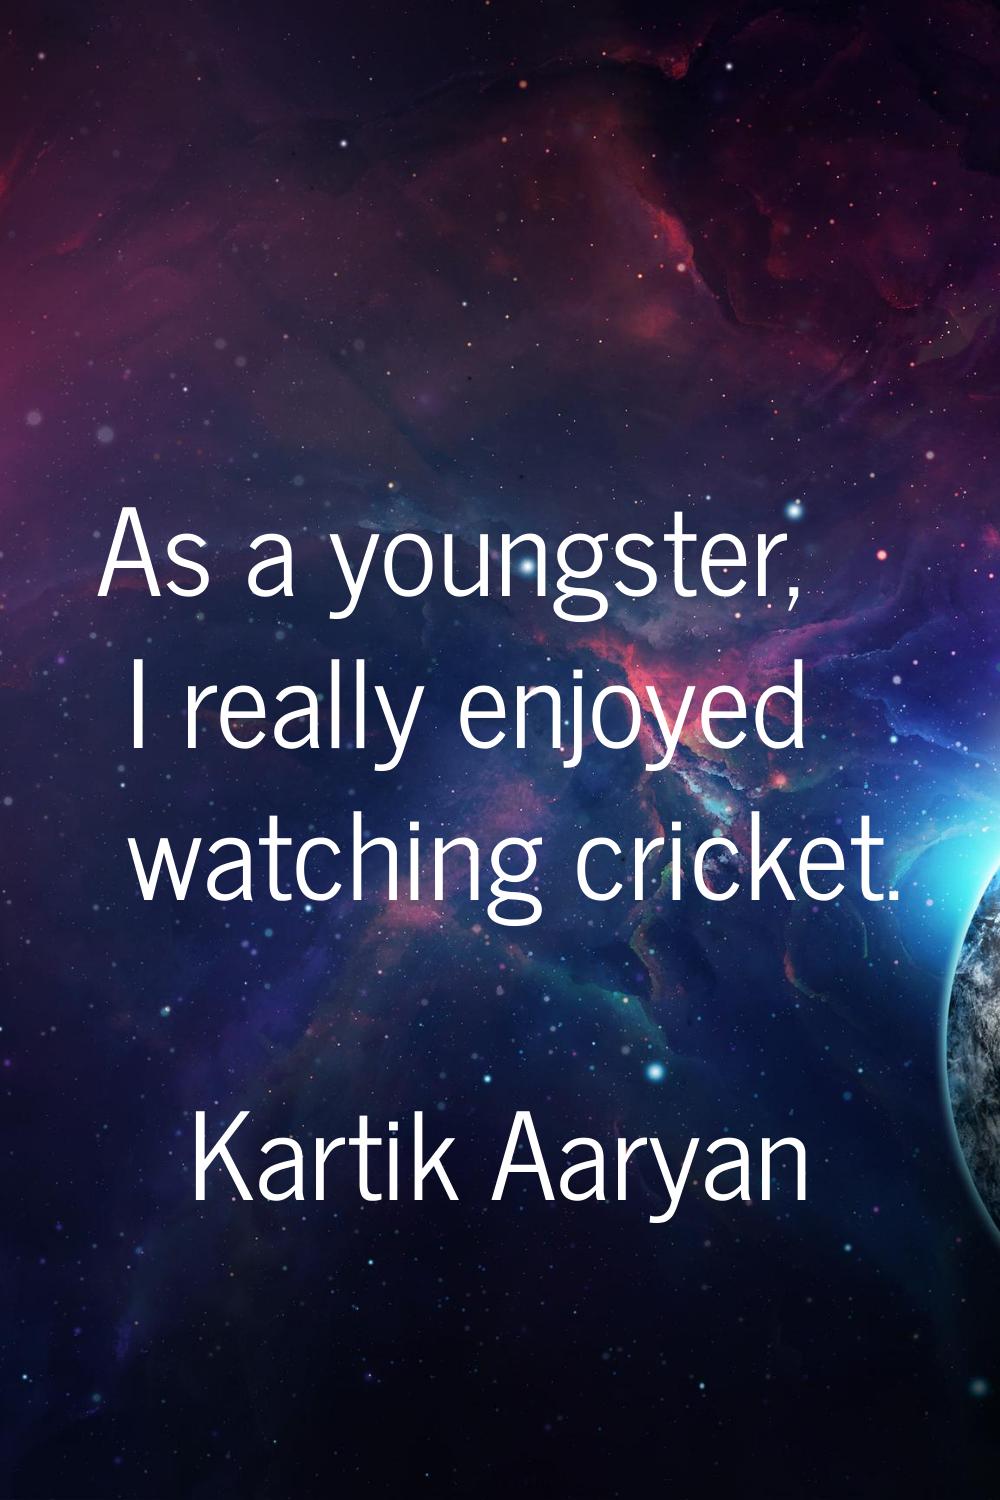 As a youngster, I really enjoyed watching cricket.